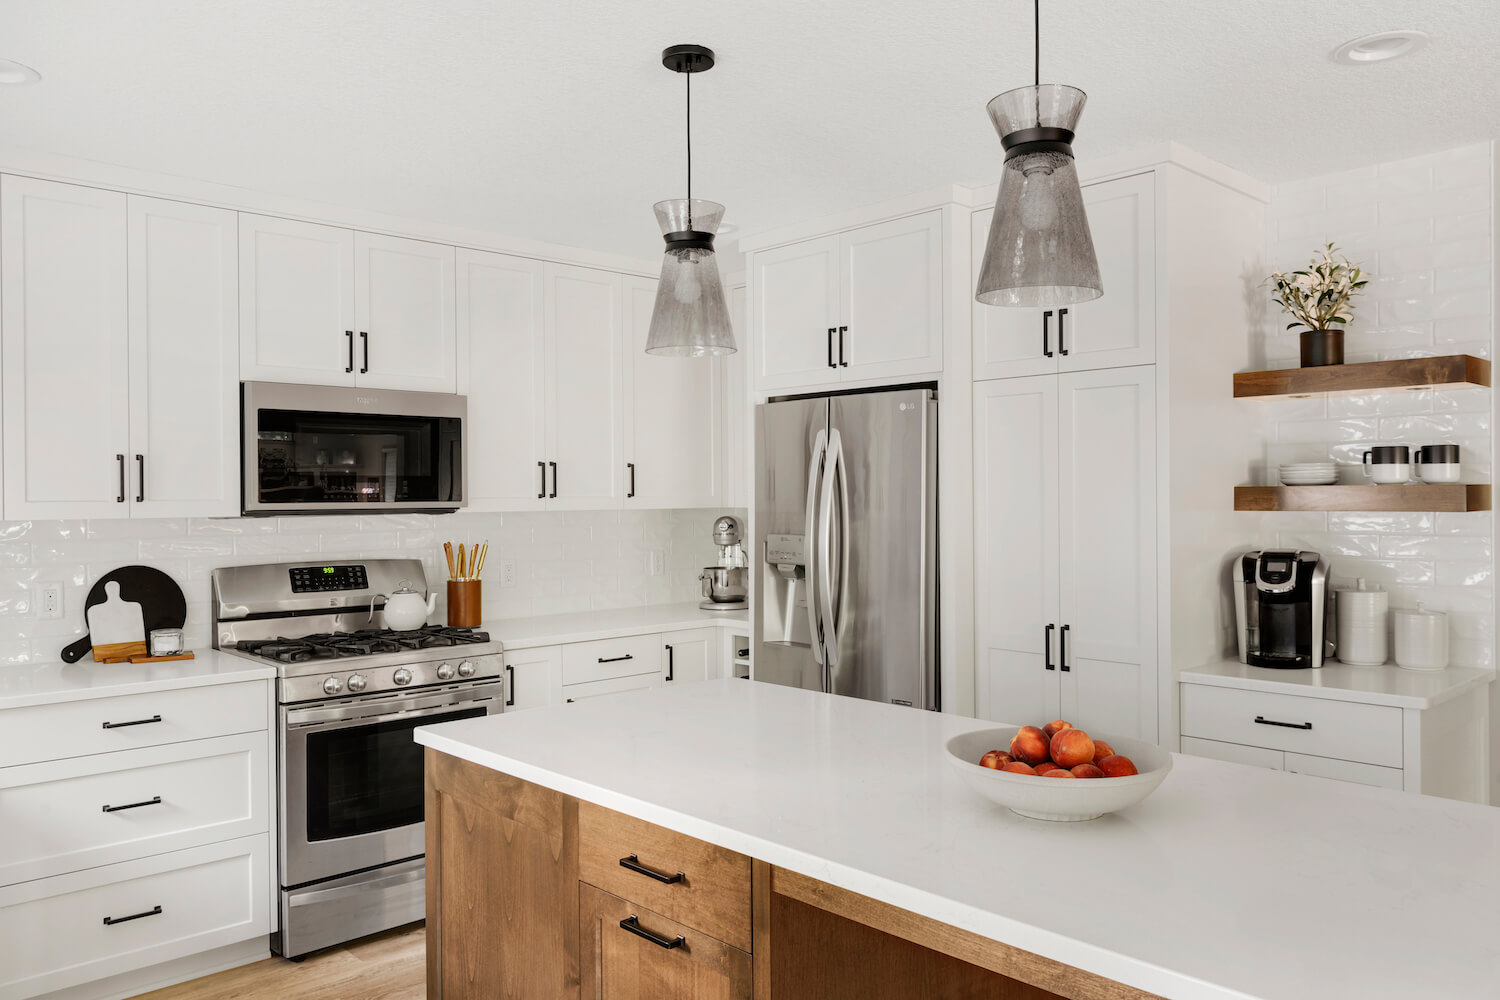 A home's kitchen with white cabinetry and counters